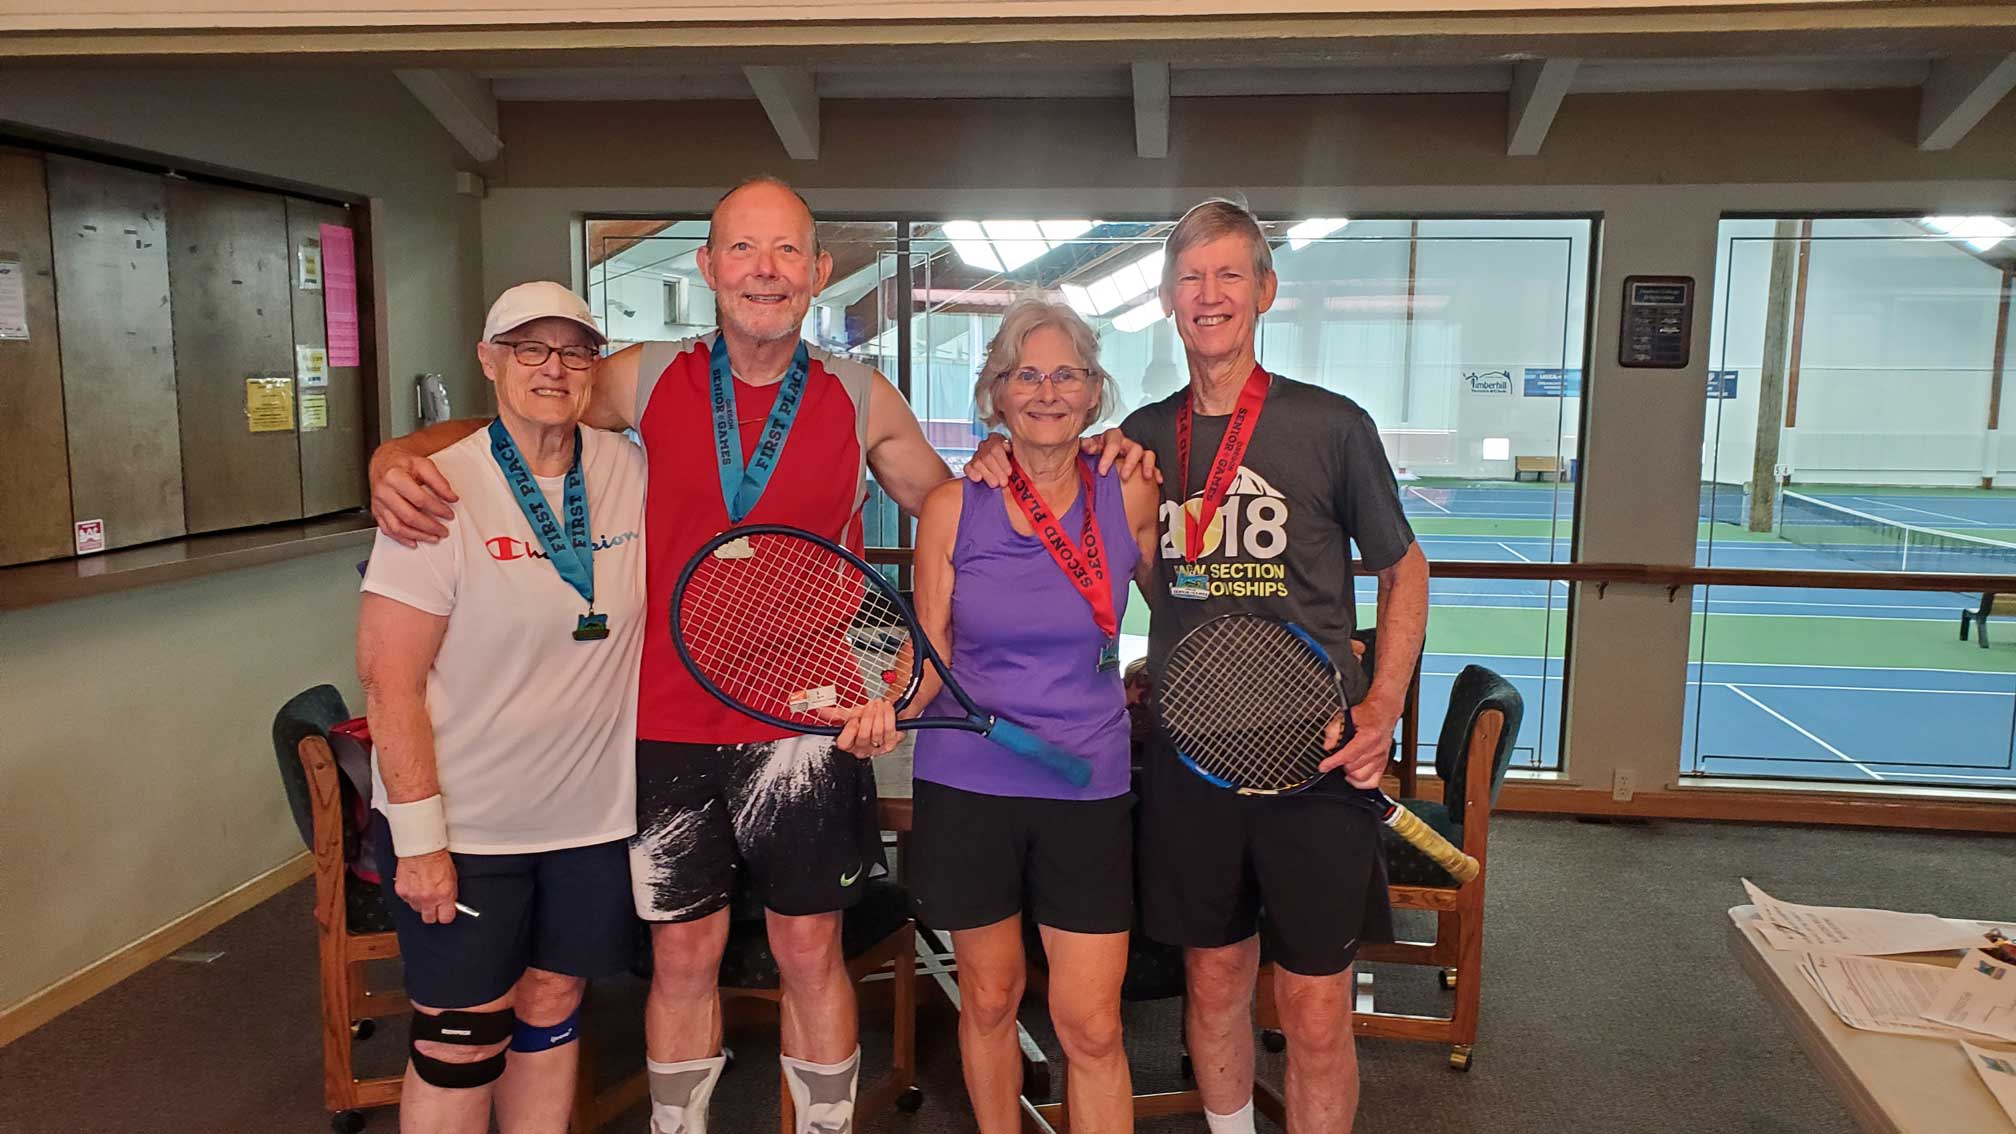 Pam-Baker, Dennis-Chappa, Kathy-Gibbs, and Keith-McConnell from Oregon Senior Games